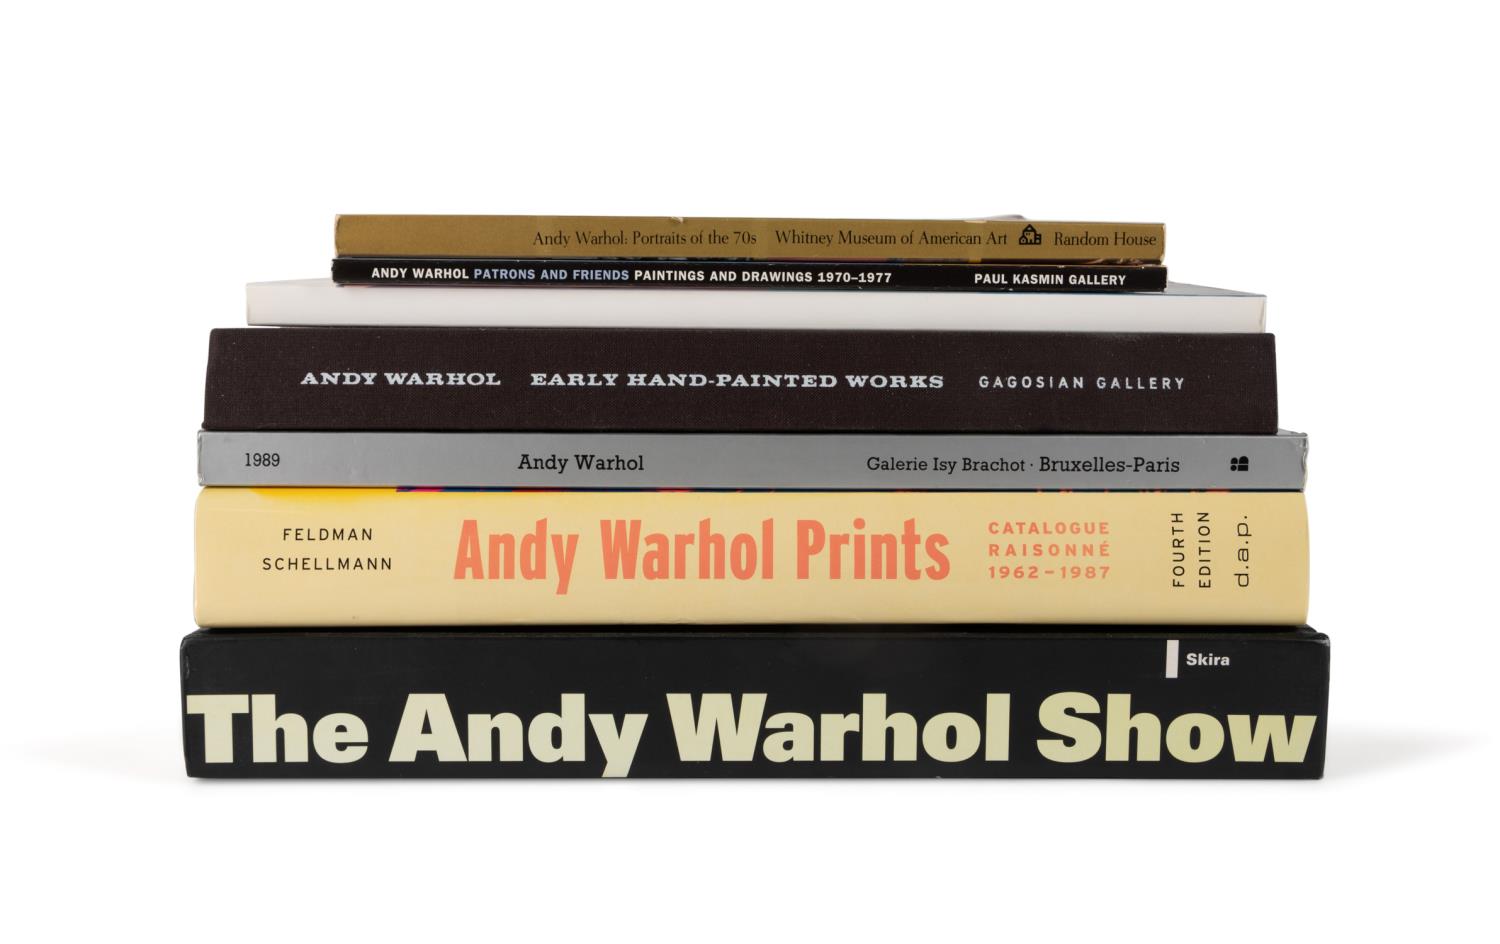 SEVEN COFFEE TABLE BOOKS ON ANDY